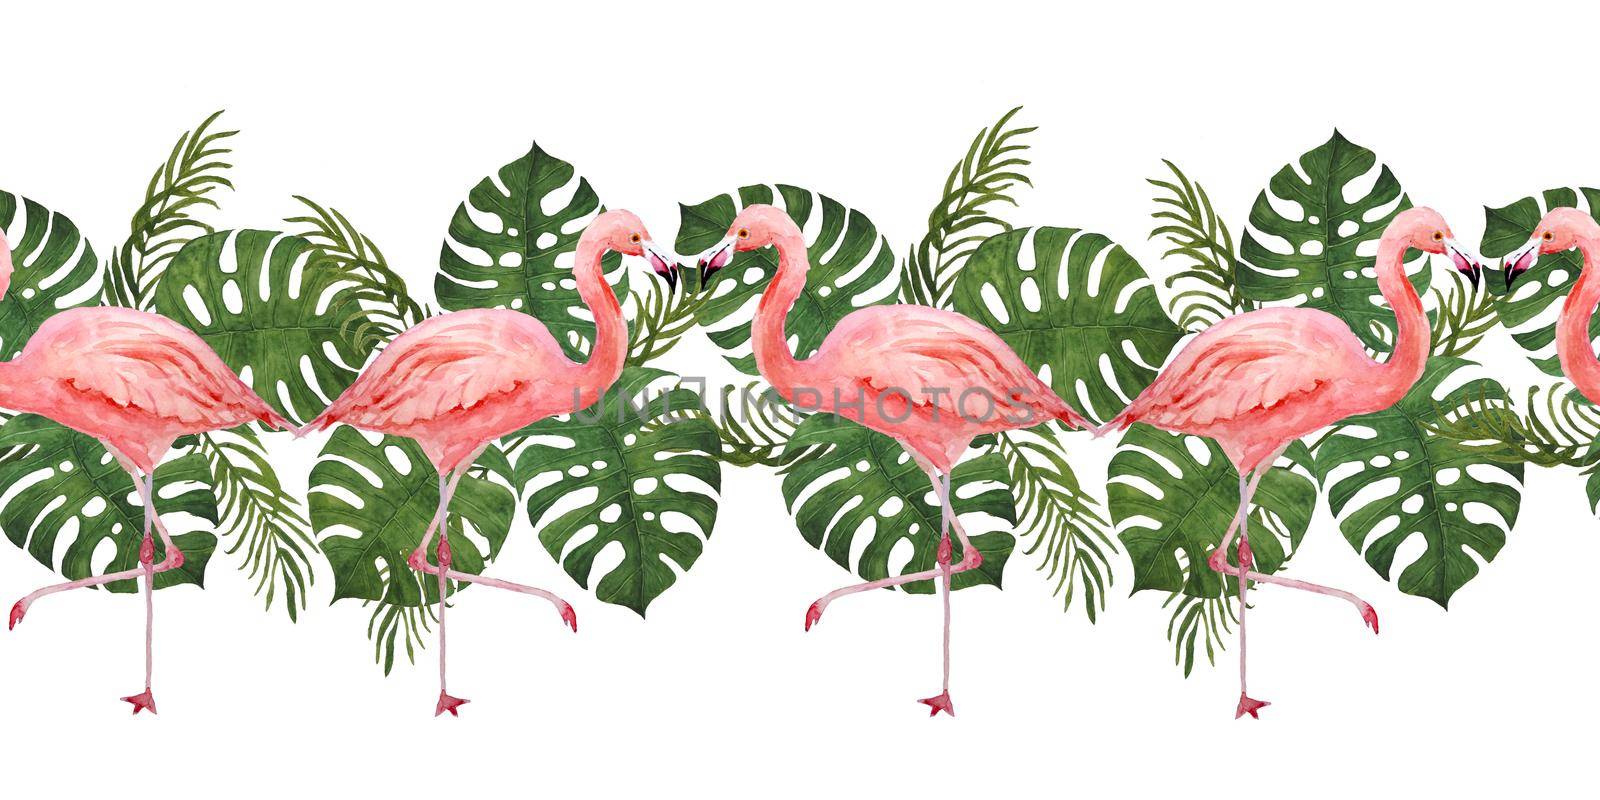 Watercolor hand drawn seamless horizontal border with pink flamingo bird and tropical green monstera palm jungle leaves on background. Summer vacation holiday concept. Print for card invitation t-shirt decor